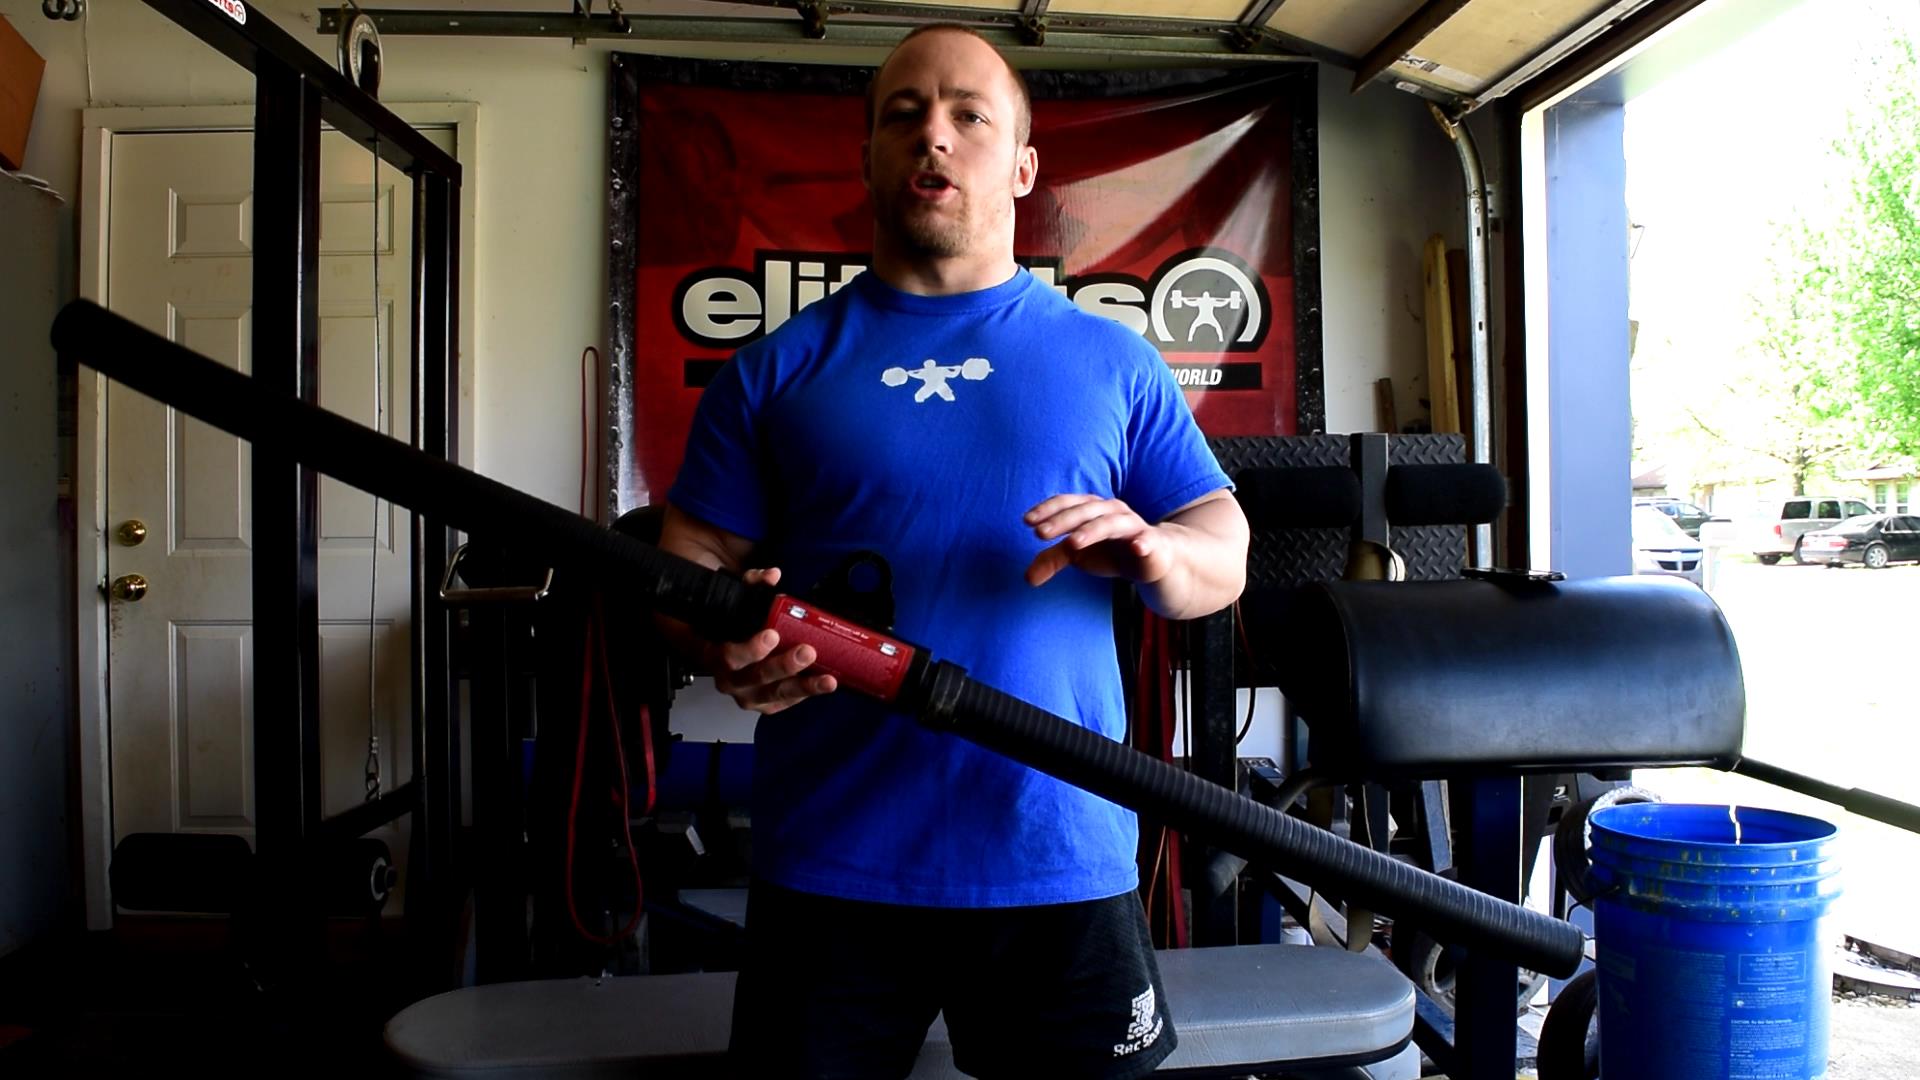 VIDEO: How To Properly Use The Tsunami Lat Pulldown Bar